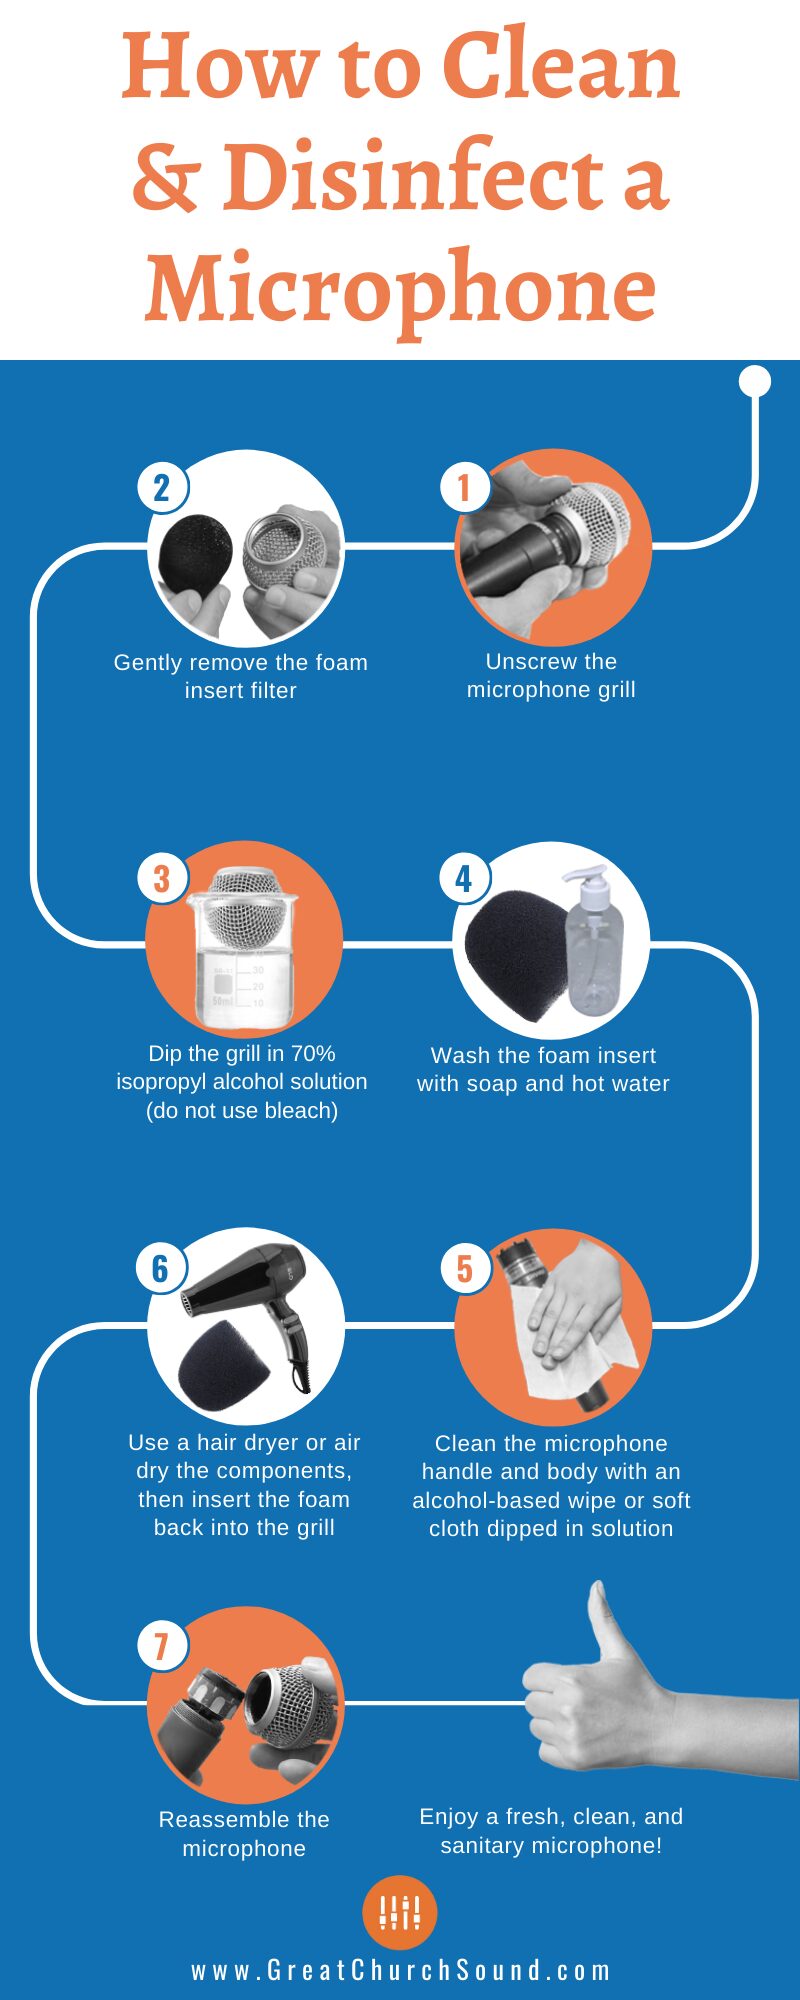 How to Clean a Microphone Infographic